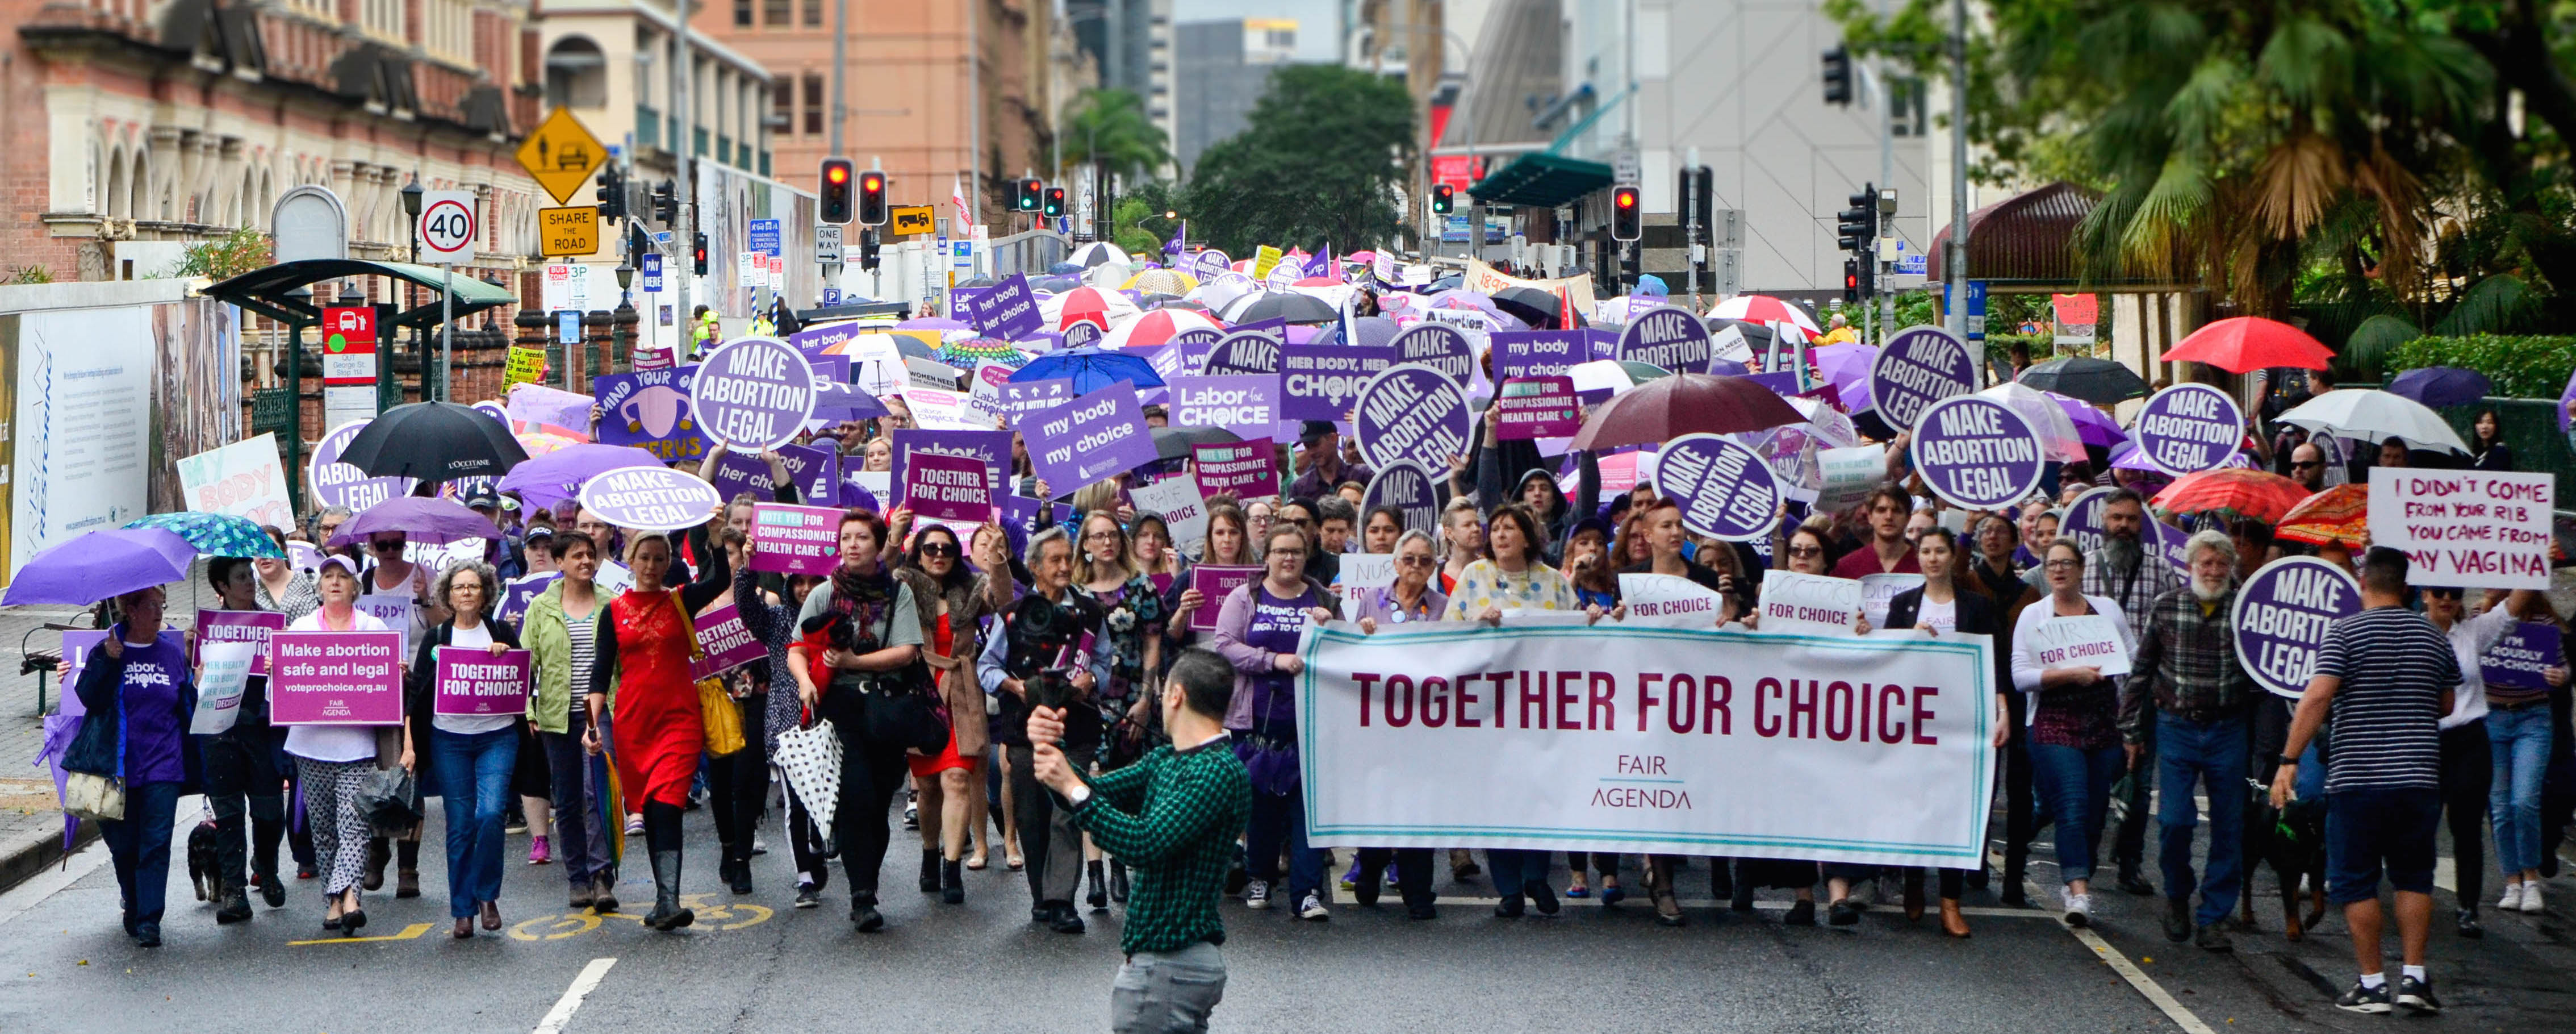 March Together for Choice